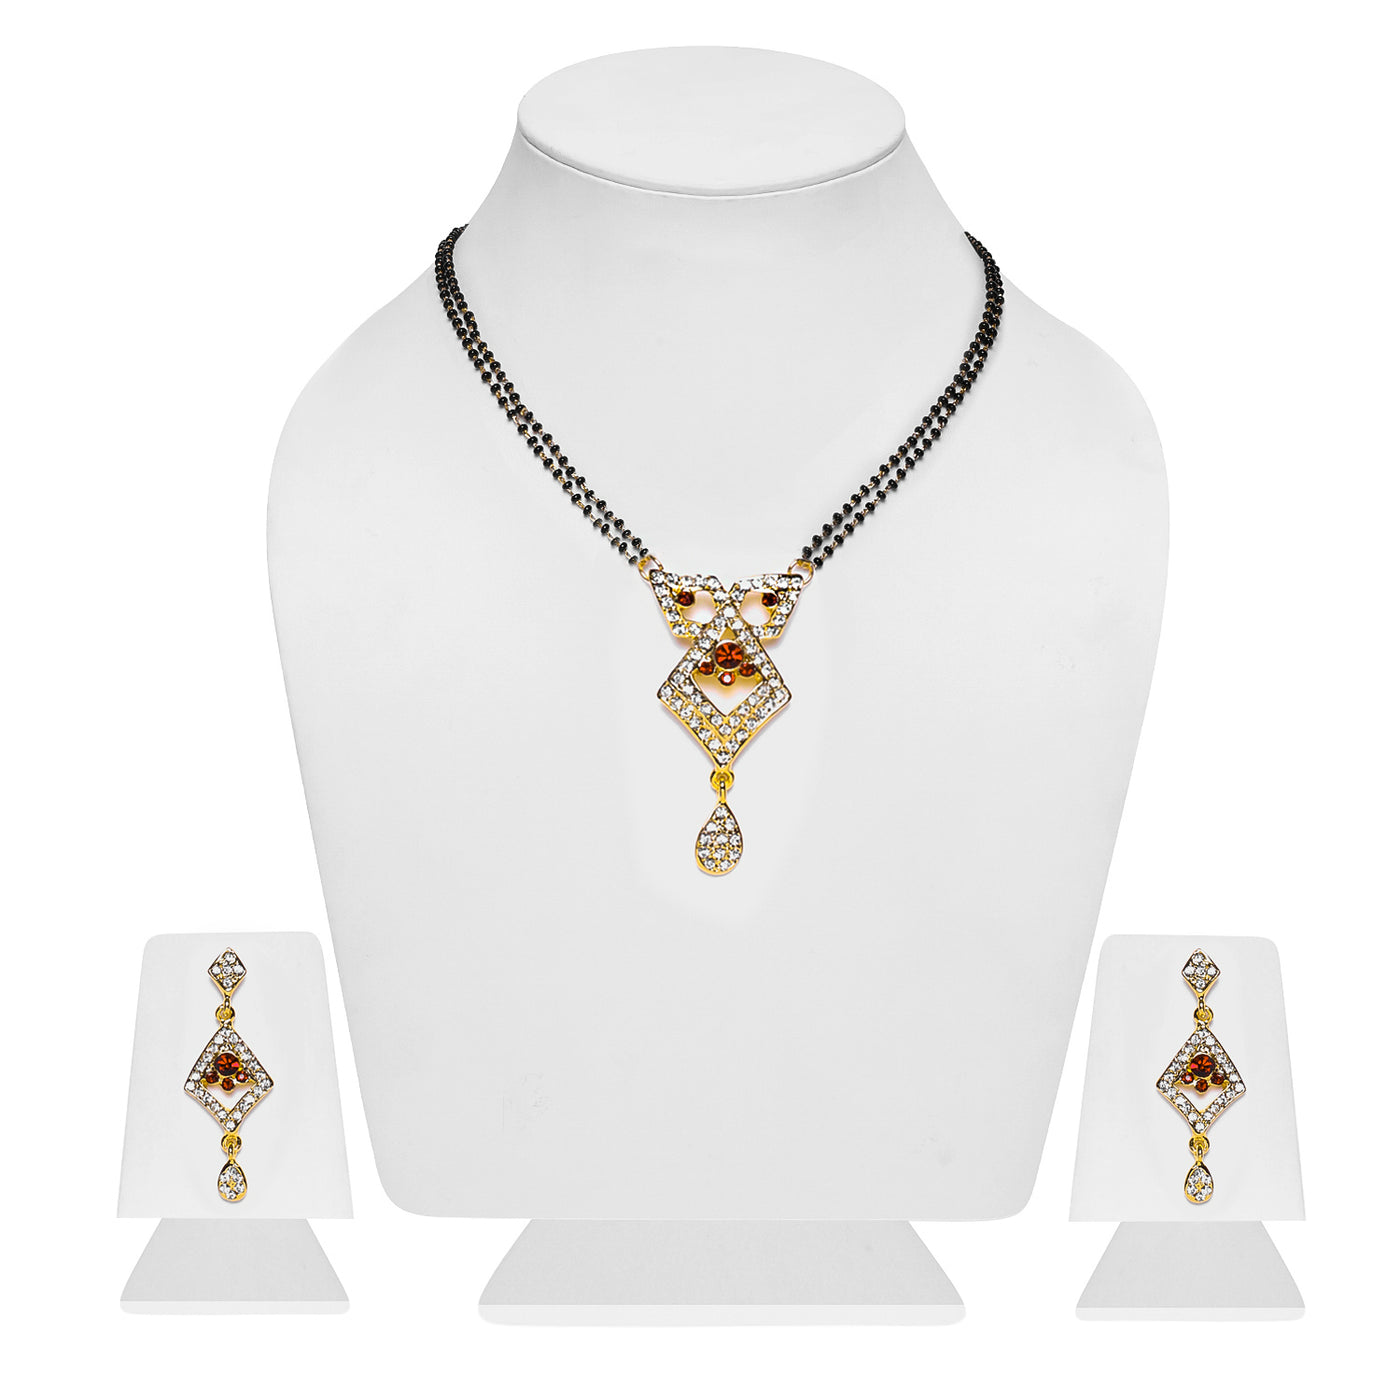 Estele Gold Plated mesmerizing Mangalsutra Necklace Set with Austrian Crystals for Women